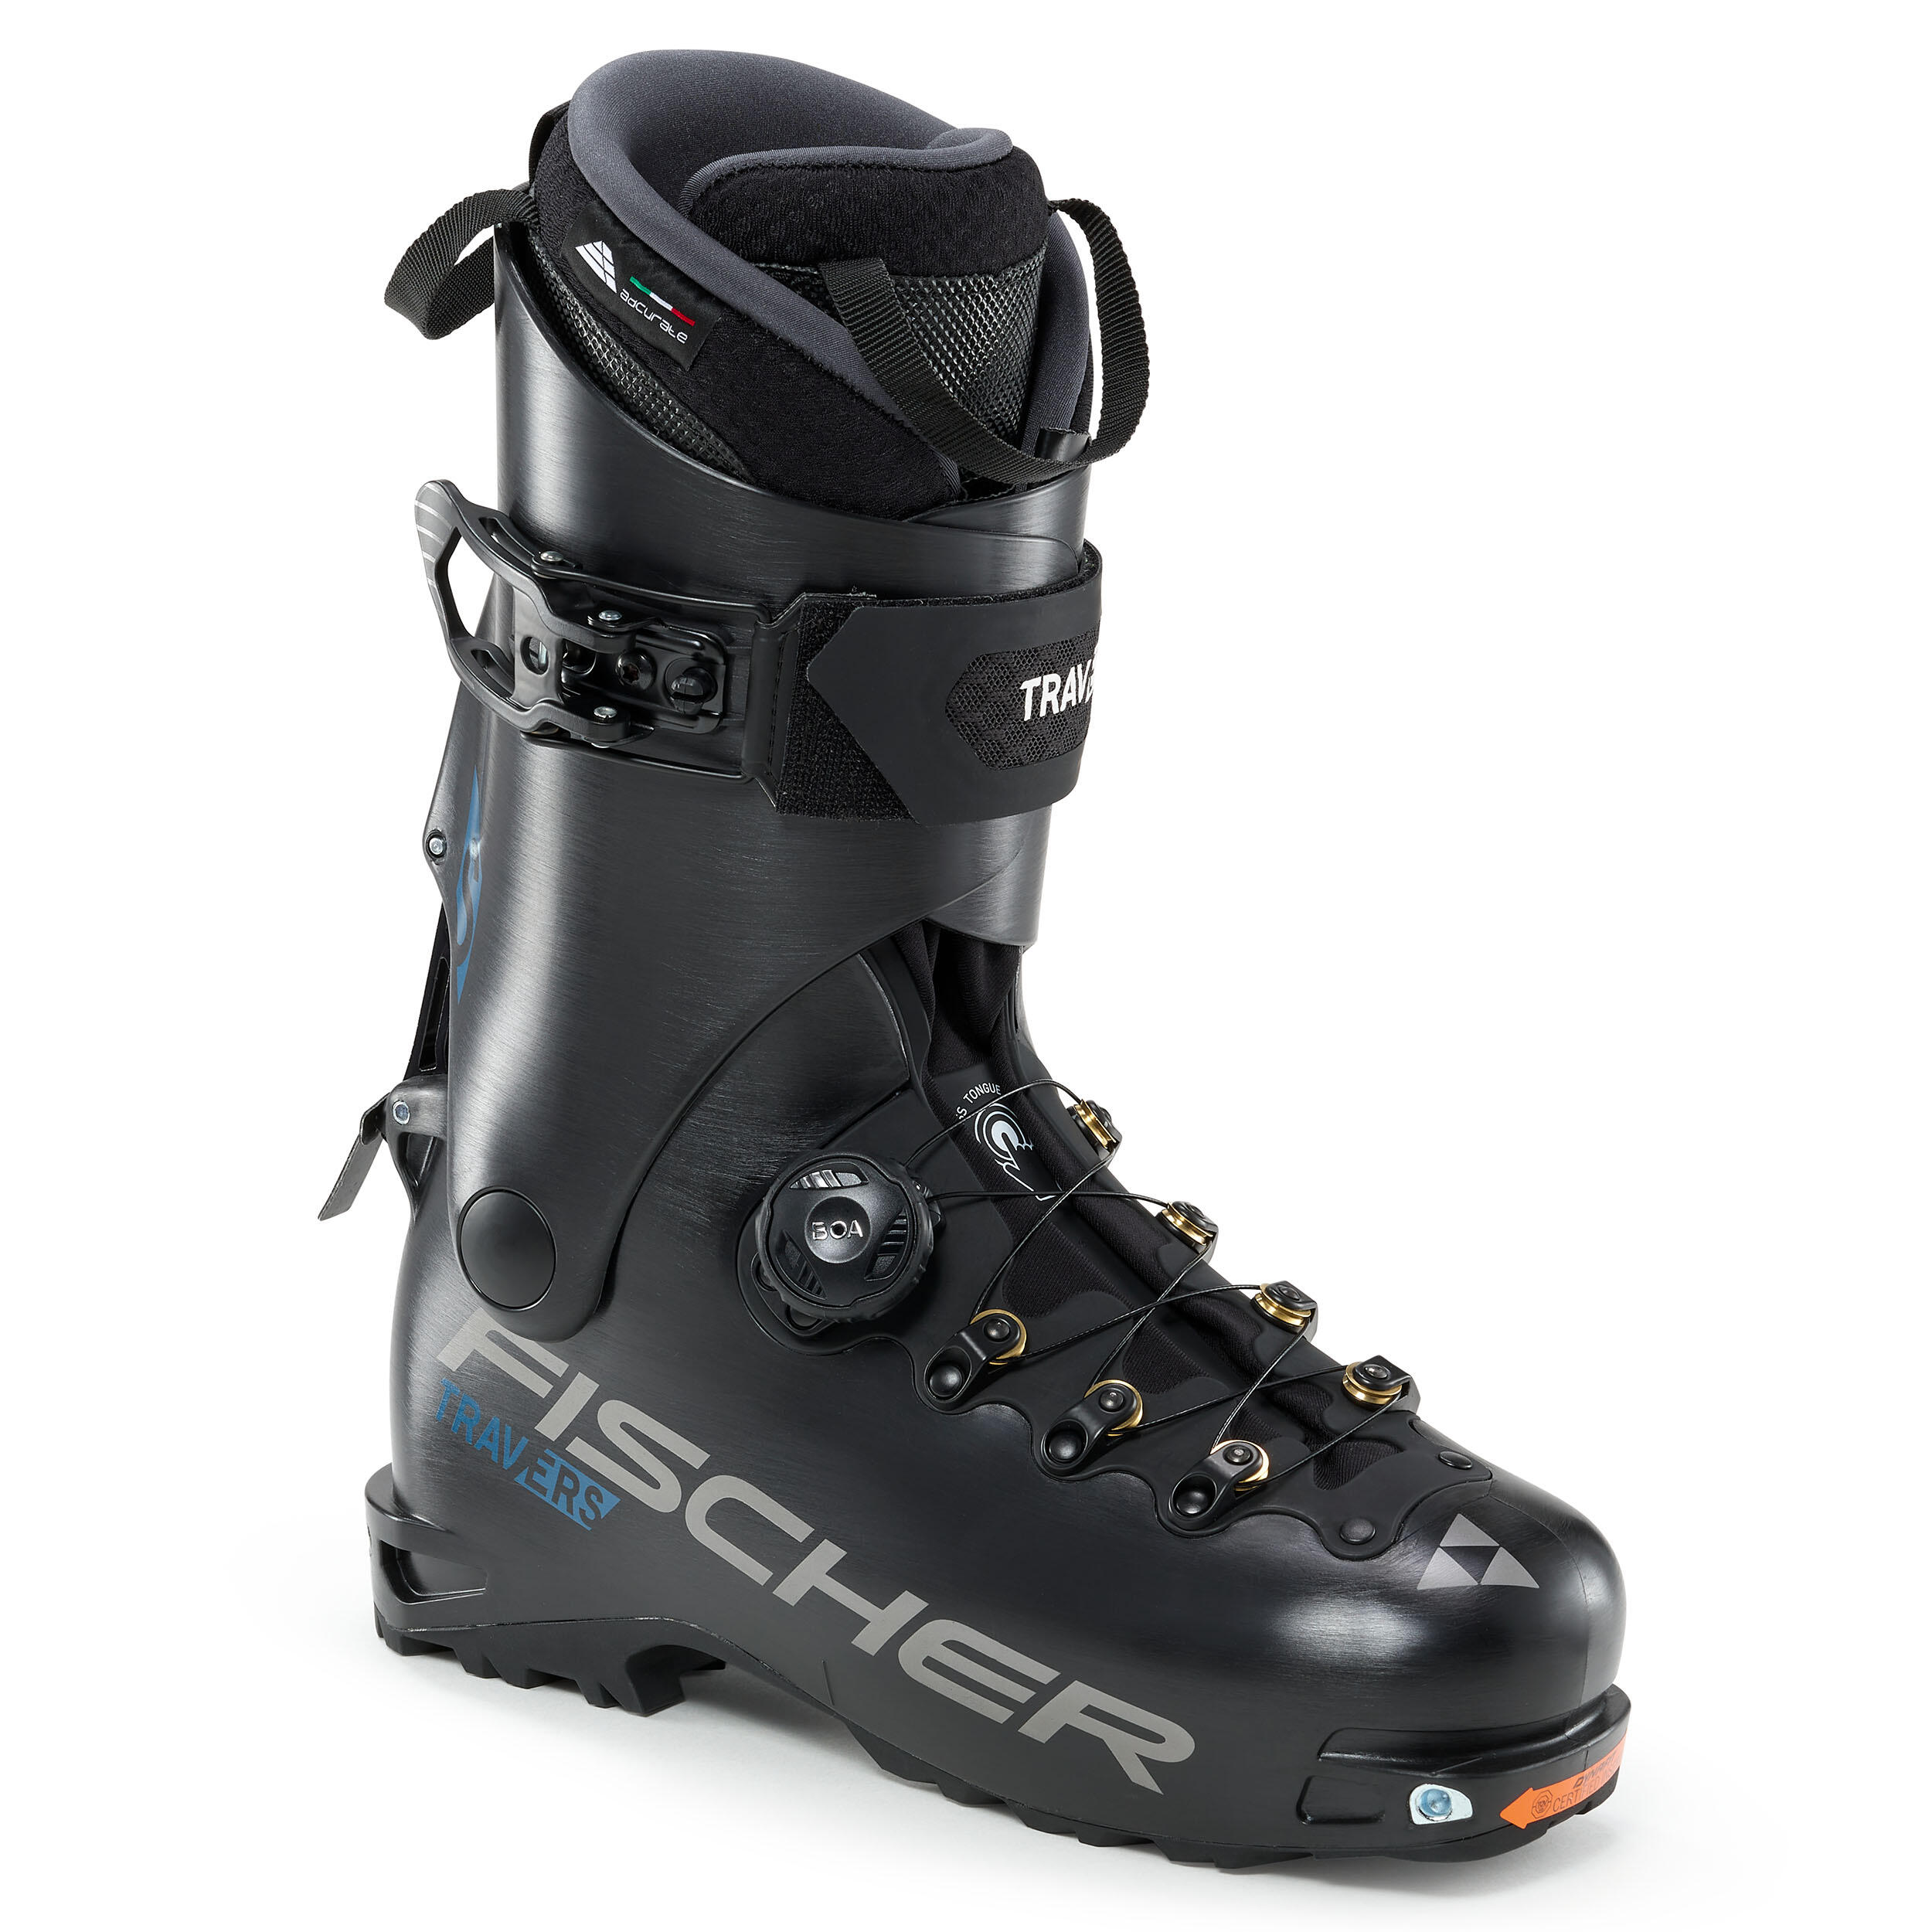 ADULT SKI TOURING BOOTS - FISCHER TRAVERS TS 1/10